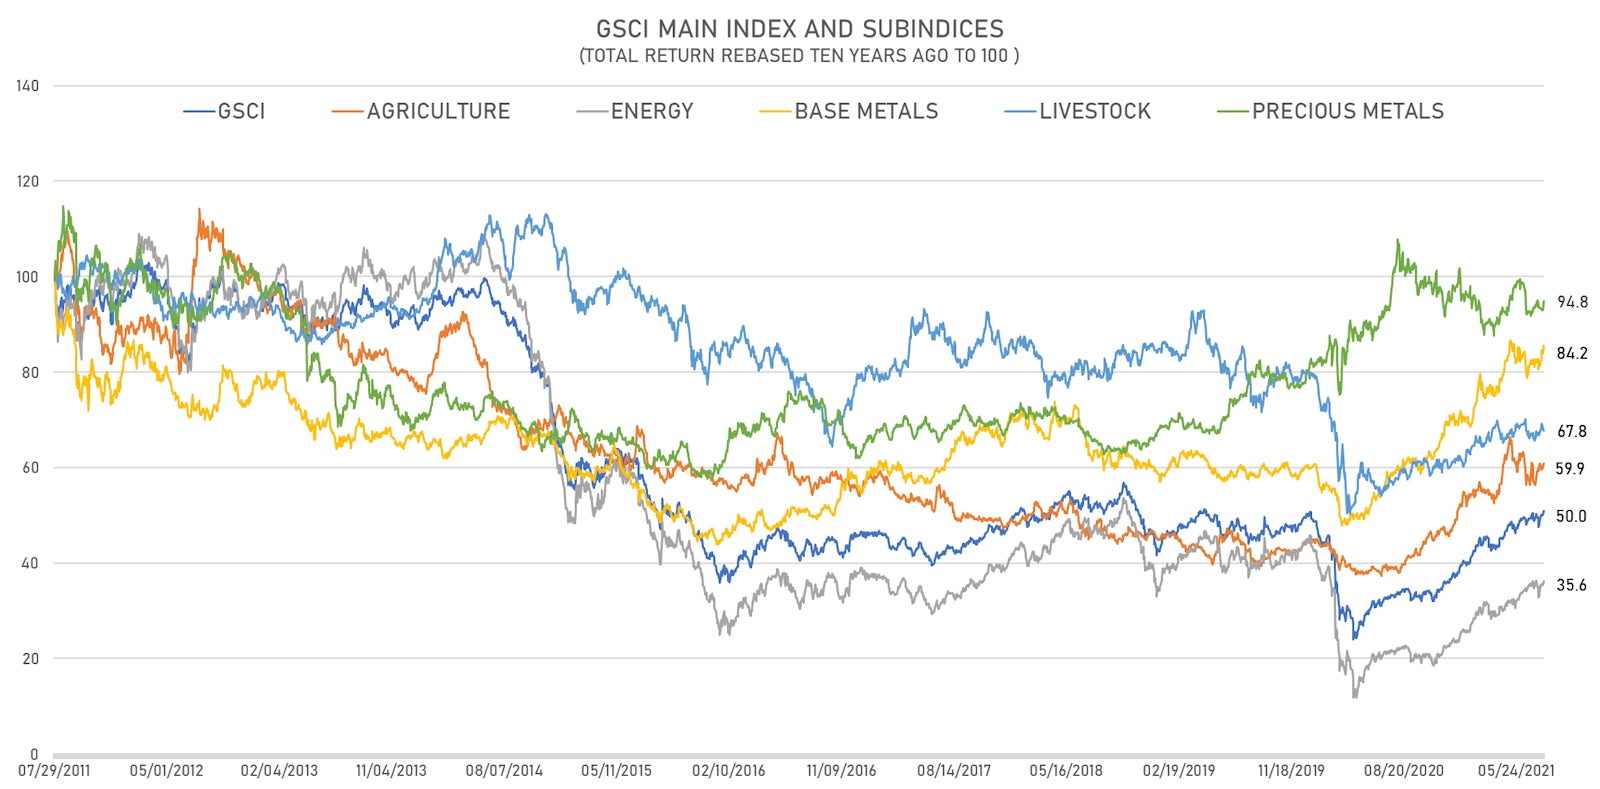 S&P GSCI Sub-Indices: Terrible Performance Over The Last 10 Years Despite A Recent Rise | Sources: ϕpost, FactSet data